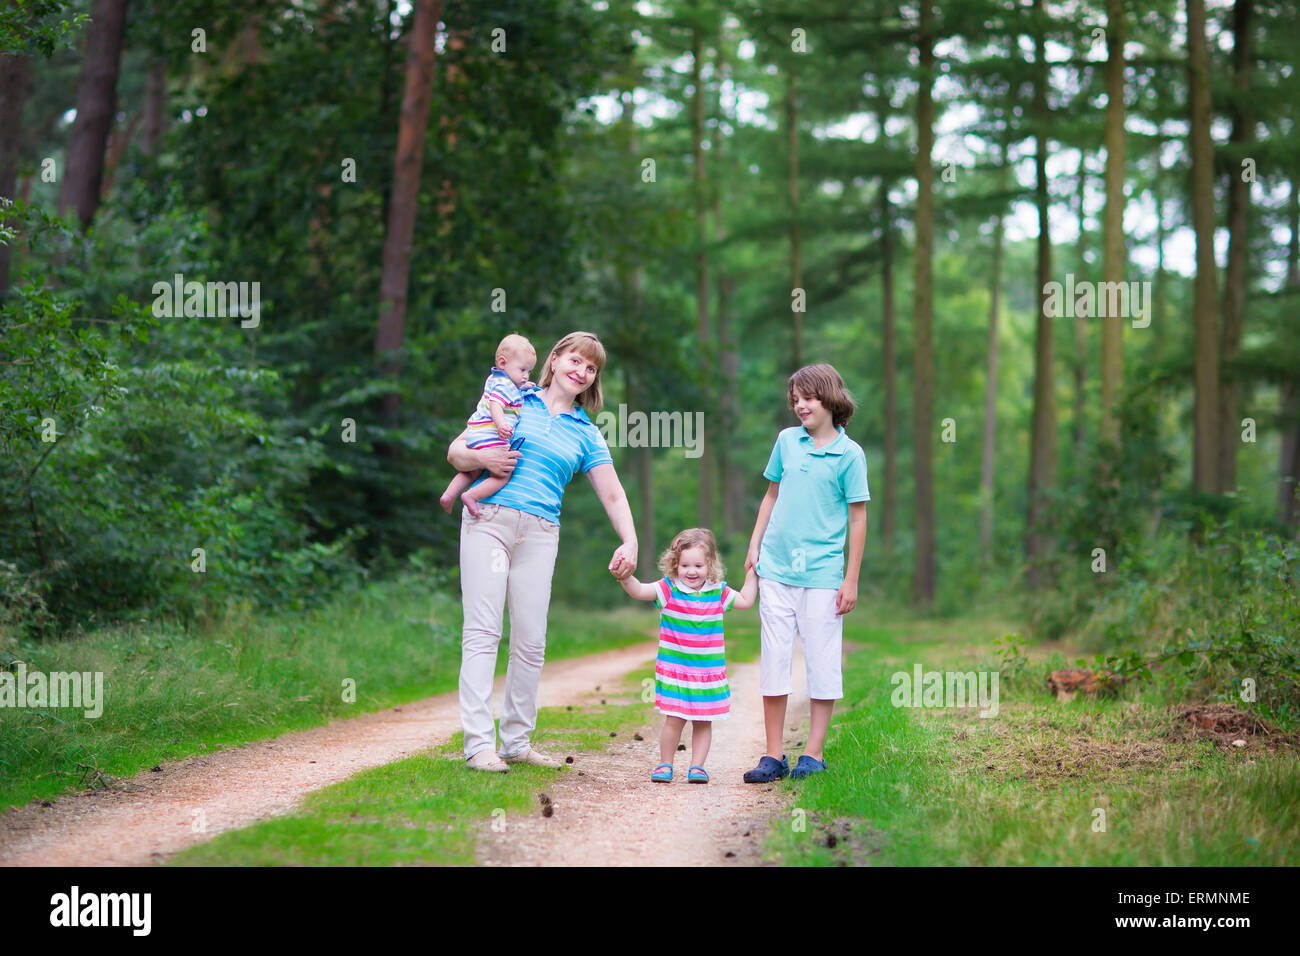 Happy active woman enjoying hiking with three children, school age boy, toddler girl and little baby, walking pine wood forest Stock Photo